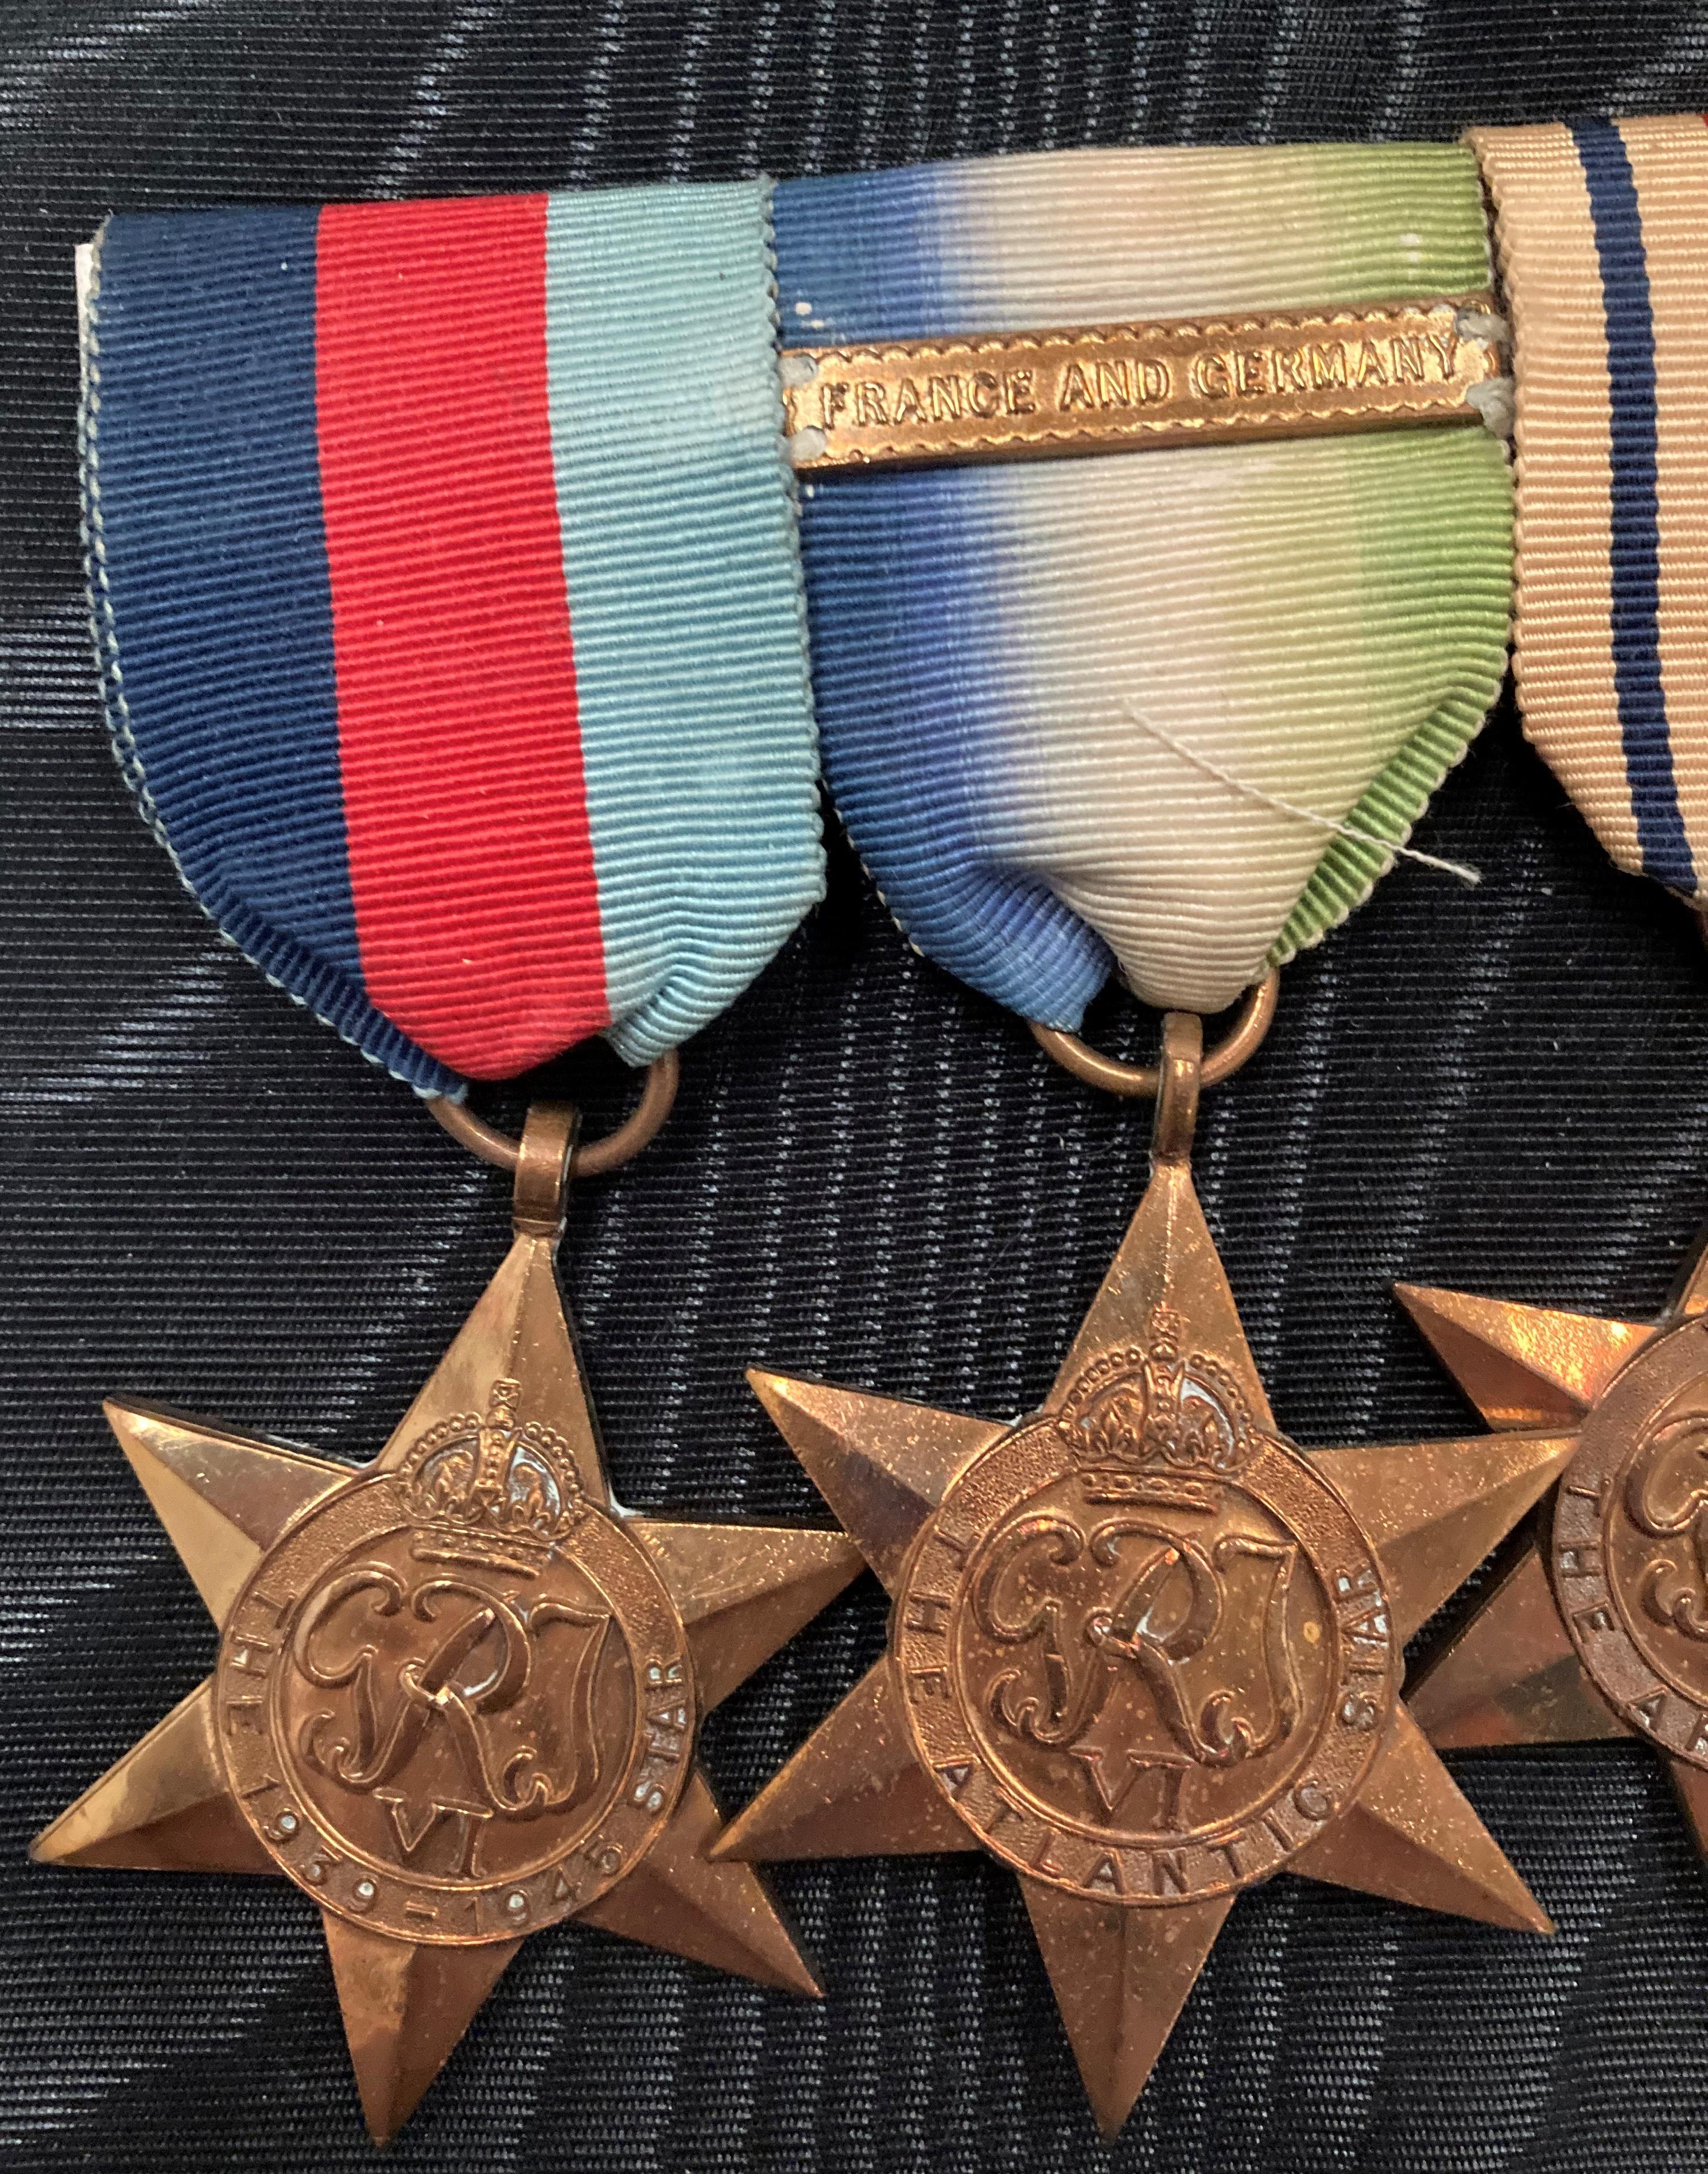 Set of five World War II medals and ribbons including 1939-1945 The Star, The Atlantic Star, - Image 3 of 5